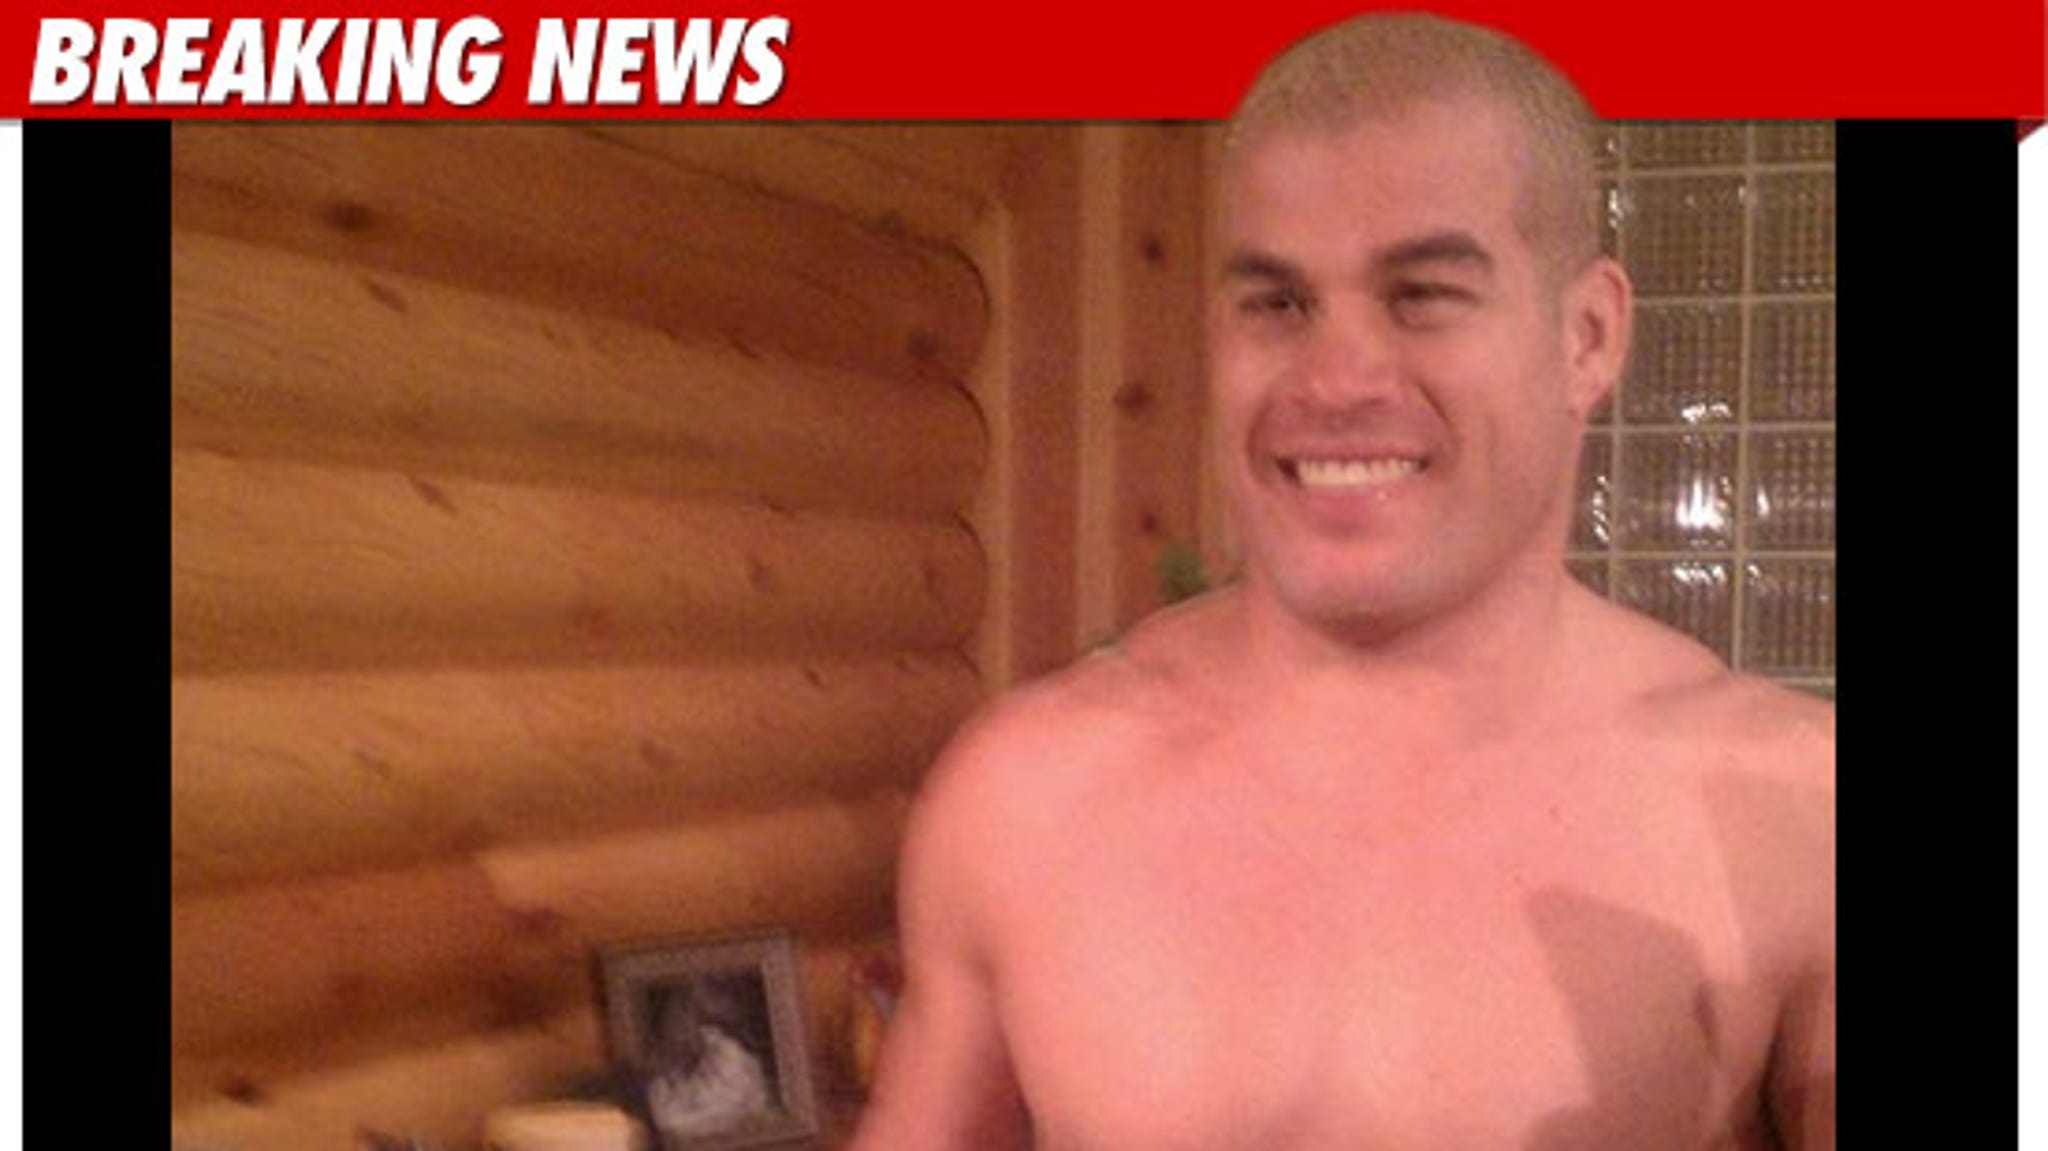 Someone posted a full-frontal naked photo of MMA fighter Tito Ortiz through...